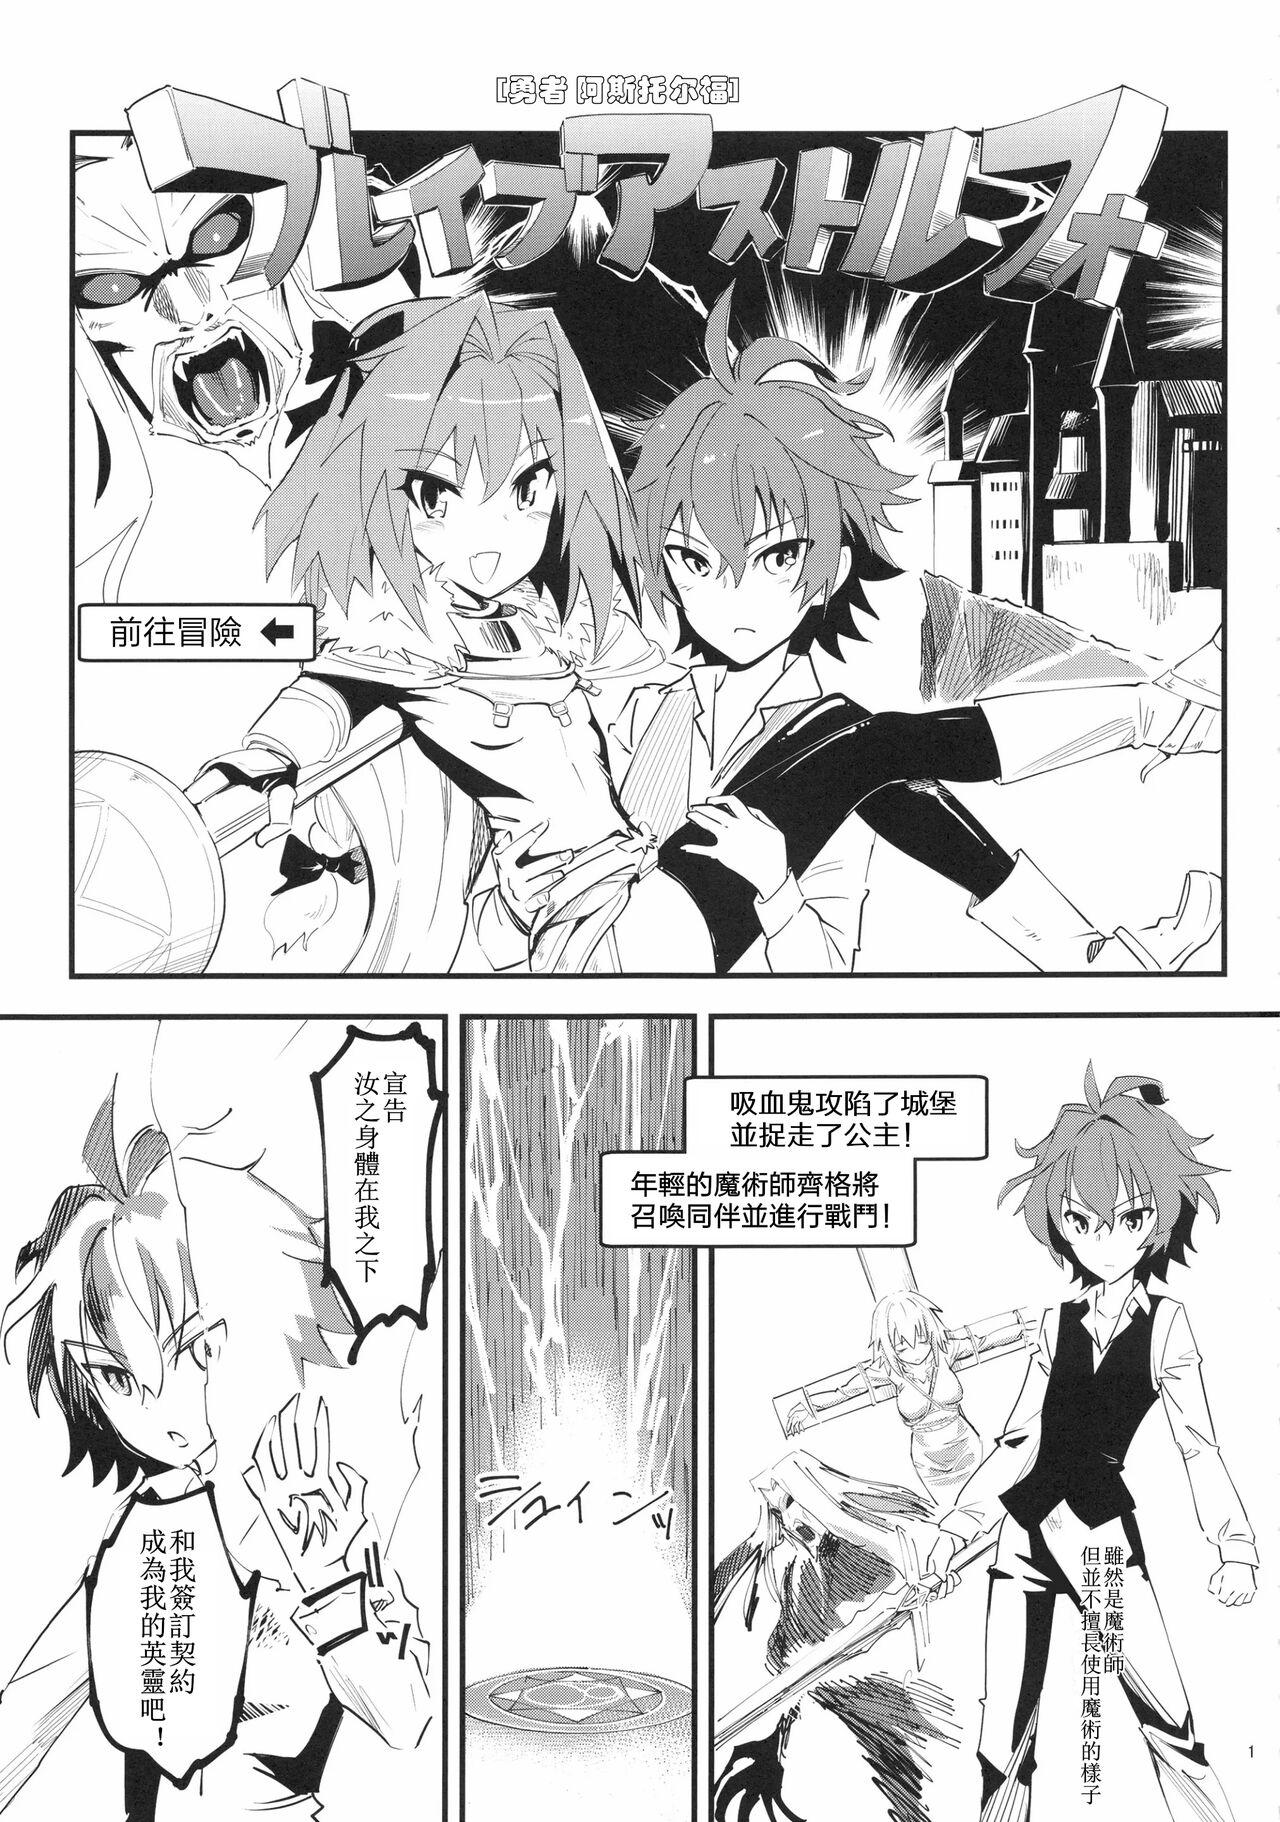 First CLASS CHANGE!! Brave Astolfo - Fate apocrypha Milfs - Page 3